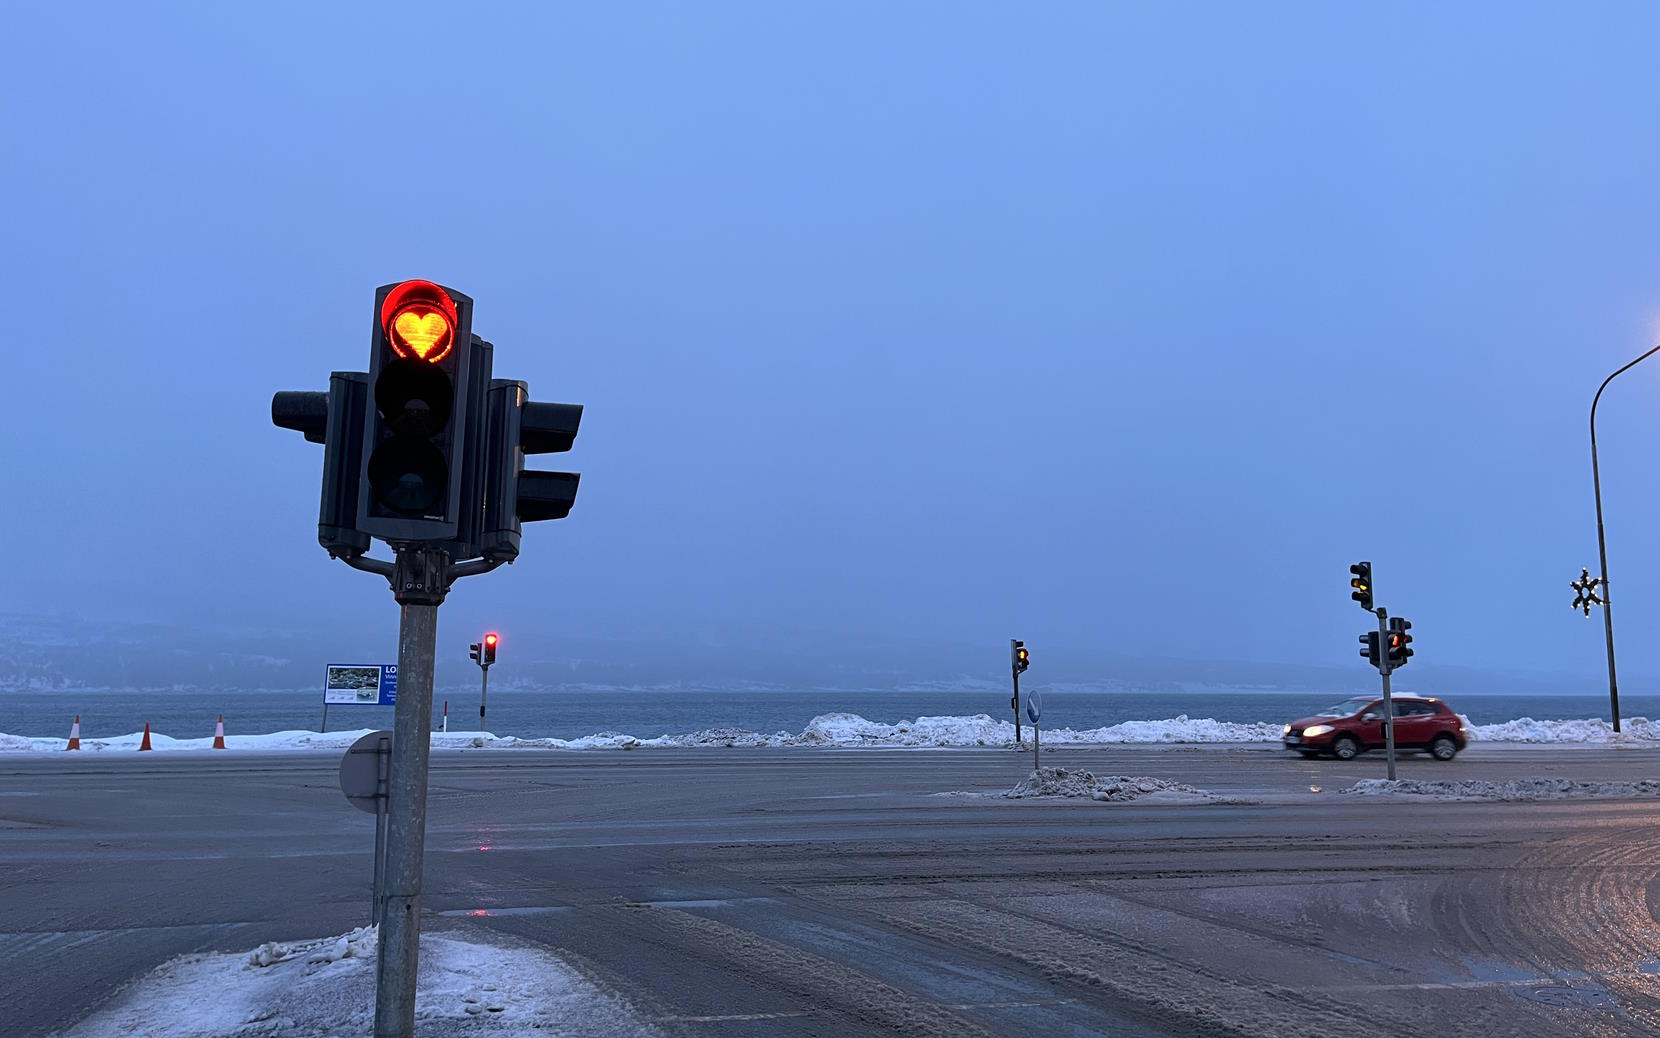 Traffic signals in Akureyri; the red light is in the shape of a heart.